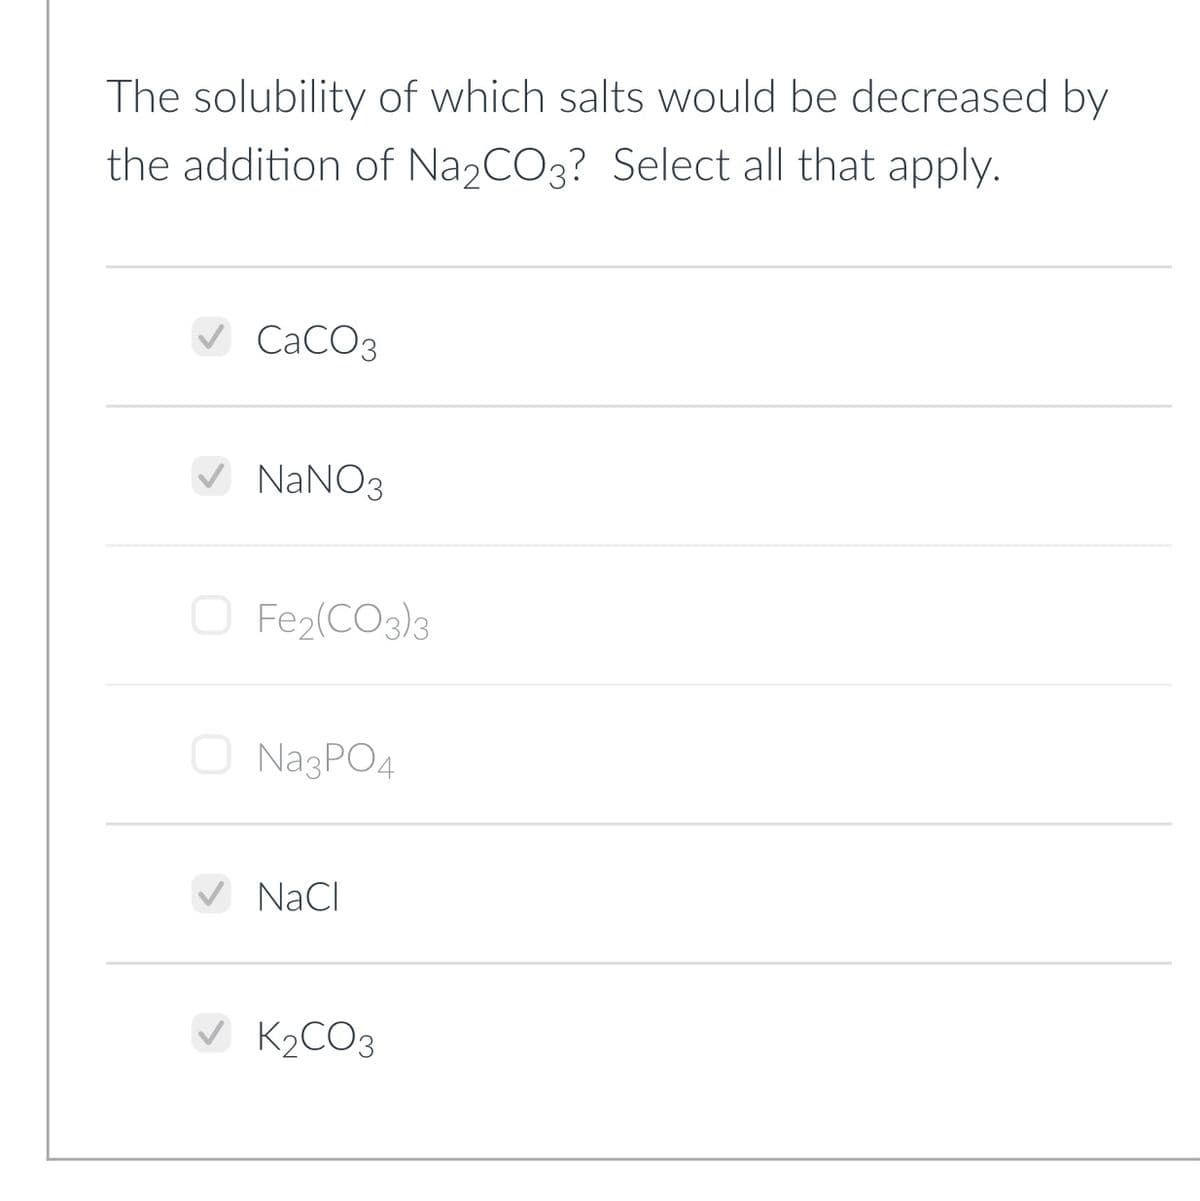 The solubility of which salts would be decreased by
the addition of Na2CO3? Select all that apply.
CaCO3
V
NaNO3
O Fe2(CO3)3
O NazPO4
NaCI
V K2CO3
